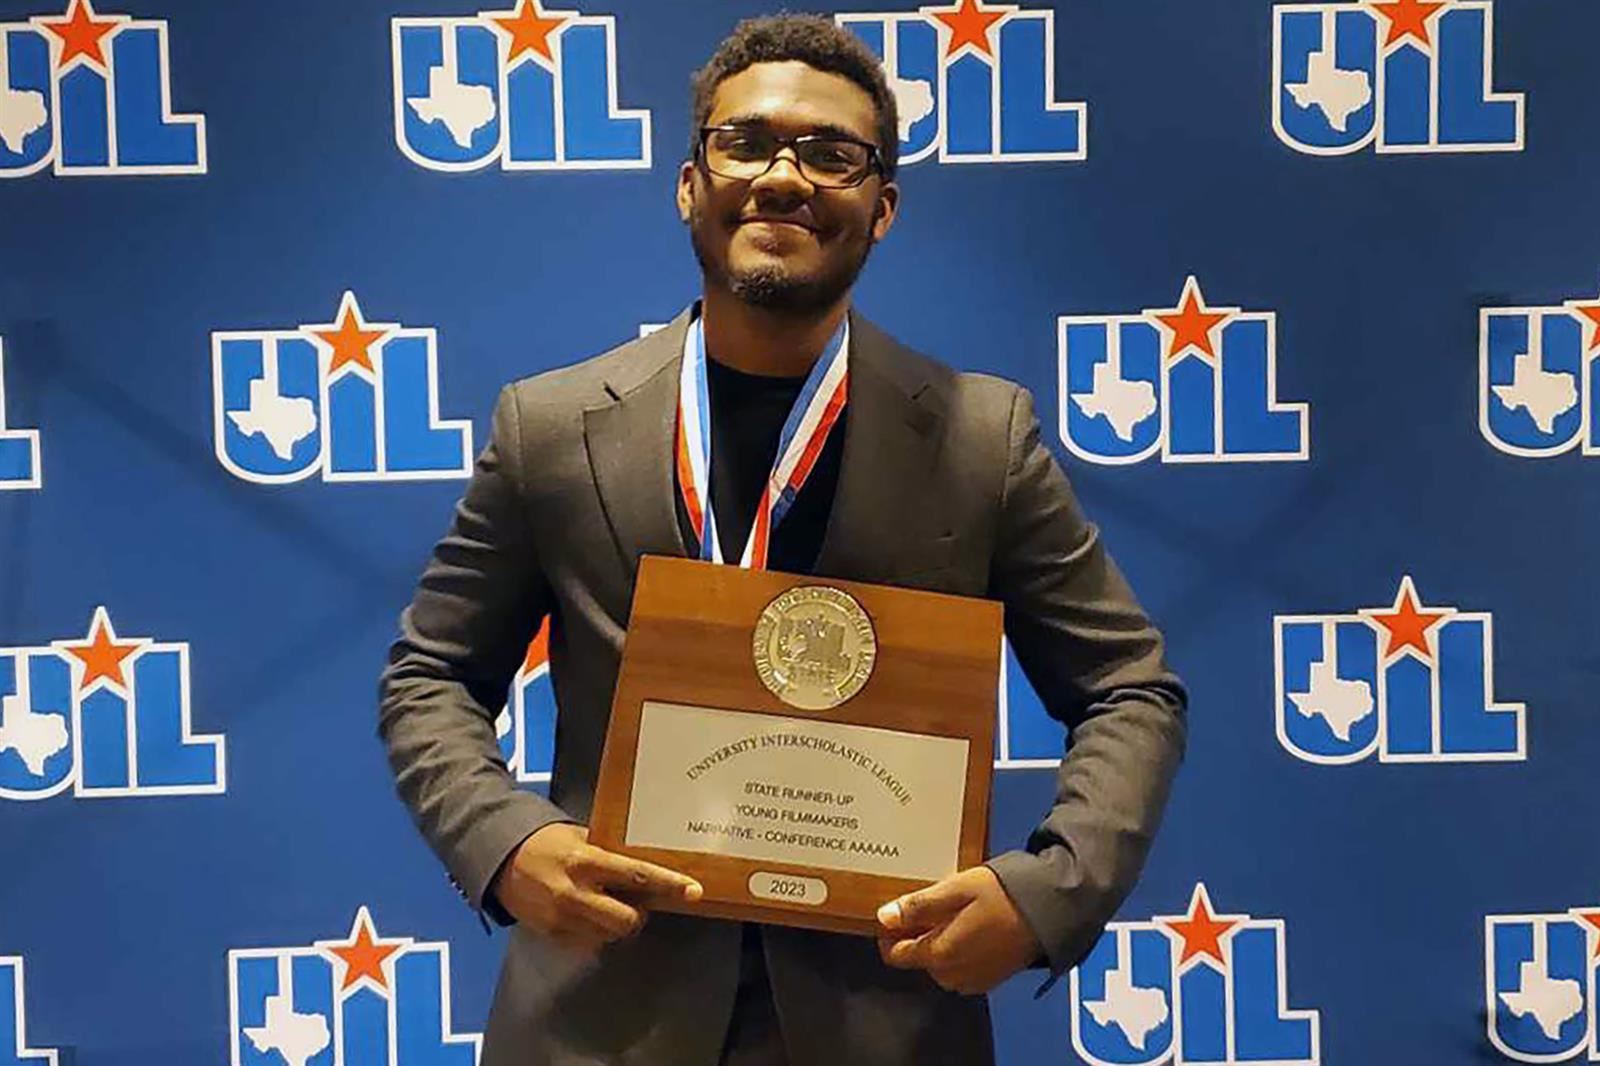 Cy Ranch senior Thomas Boyce III placed second in Class 6A narrative for his short film titled “Untitled.”